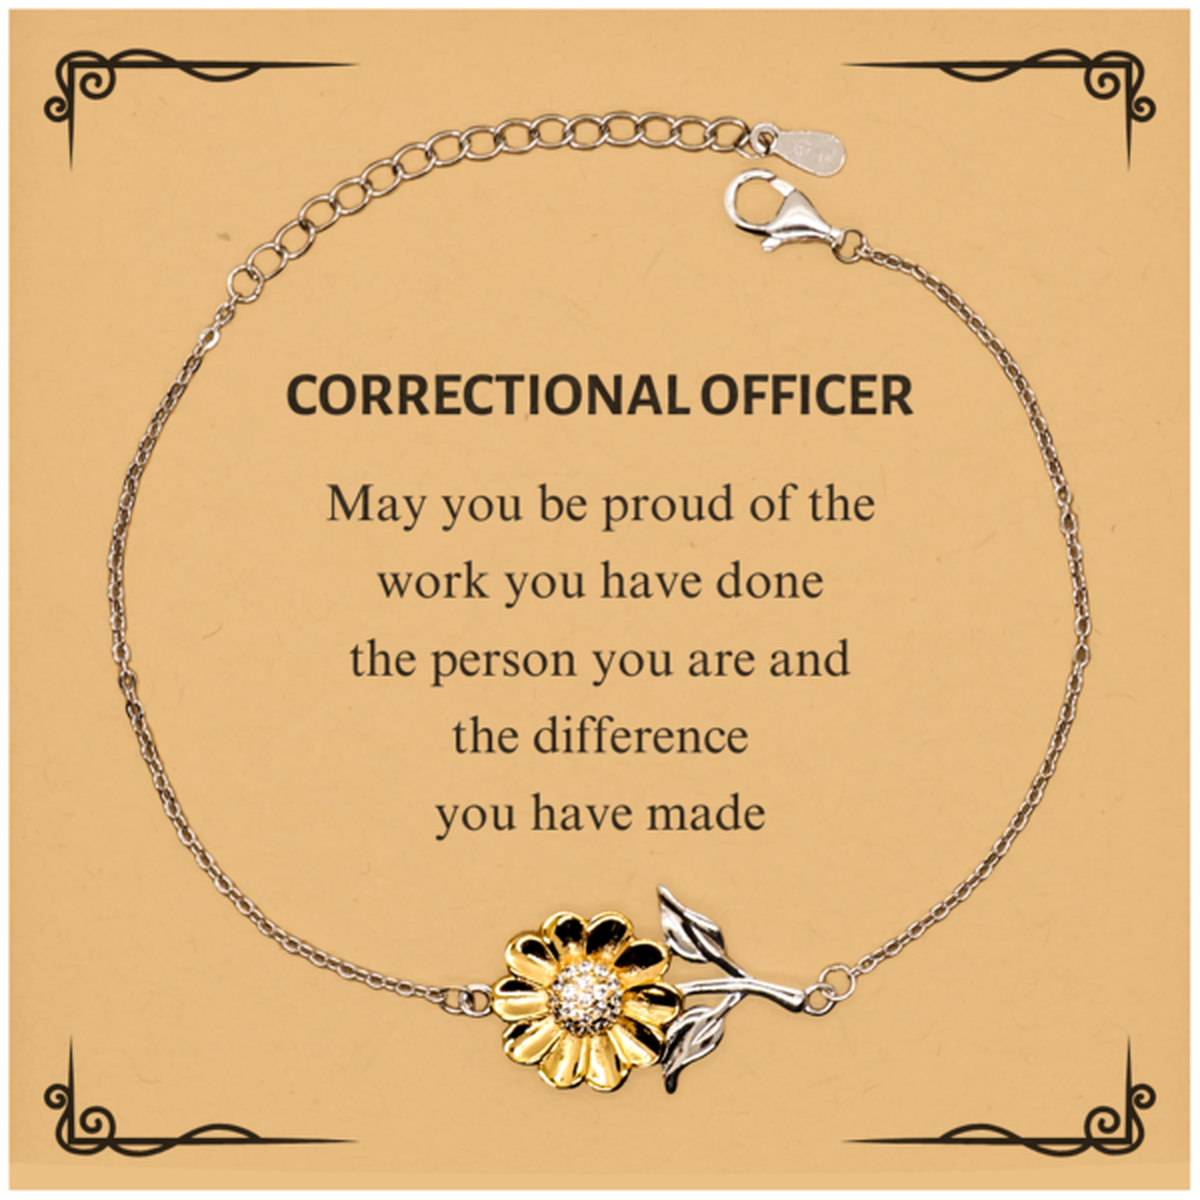 Correctional Officer May you be proud of the work you have done, Retirement Correctional Officer Sunflower Bracelet for Colleague Appreciation Gifts Amazing for Correctional Officer